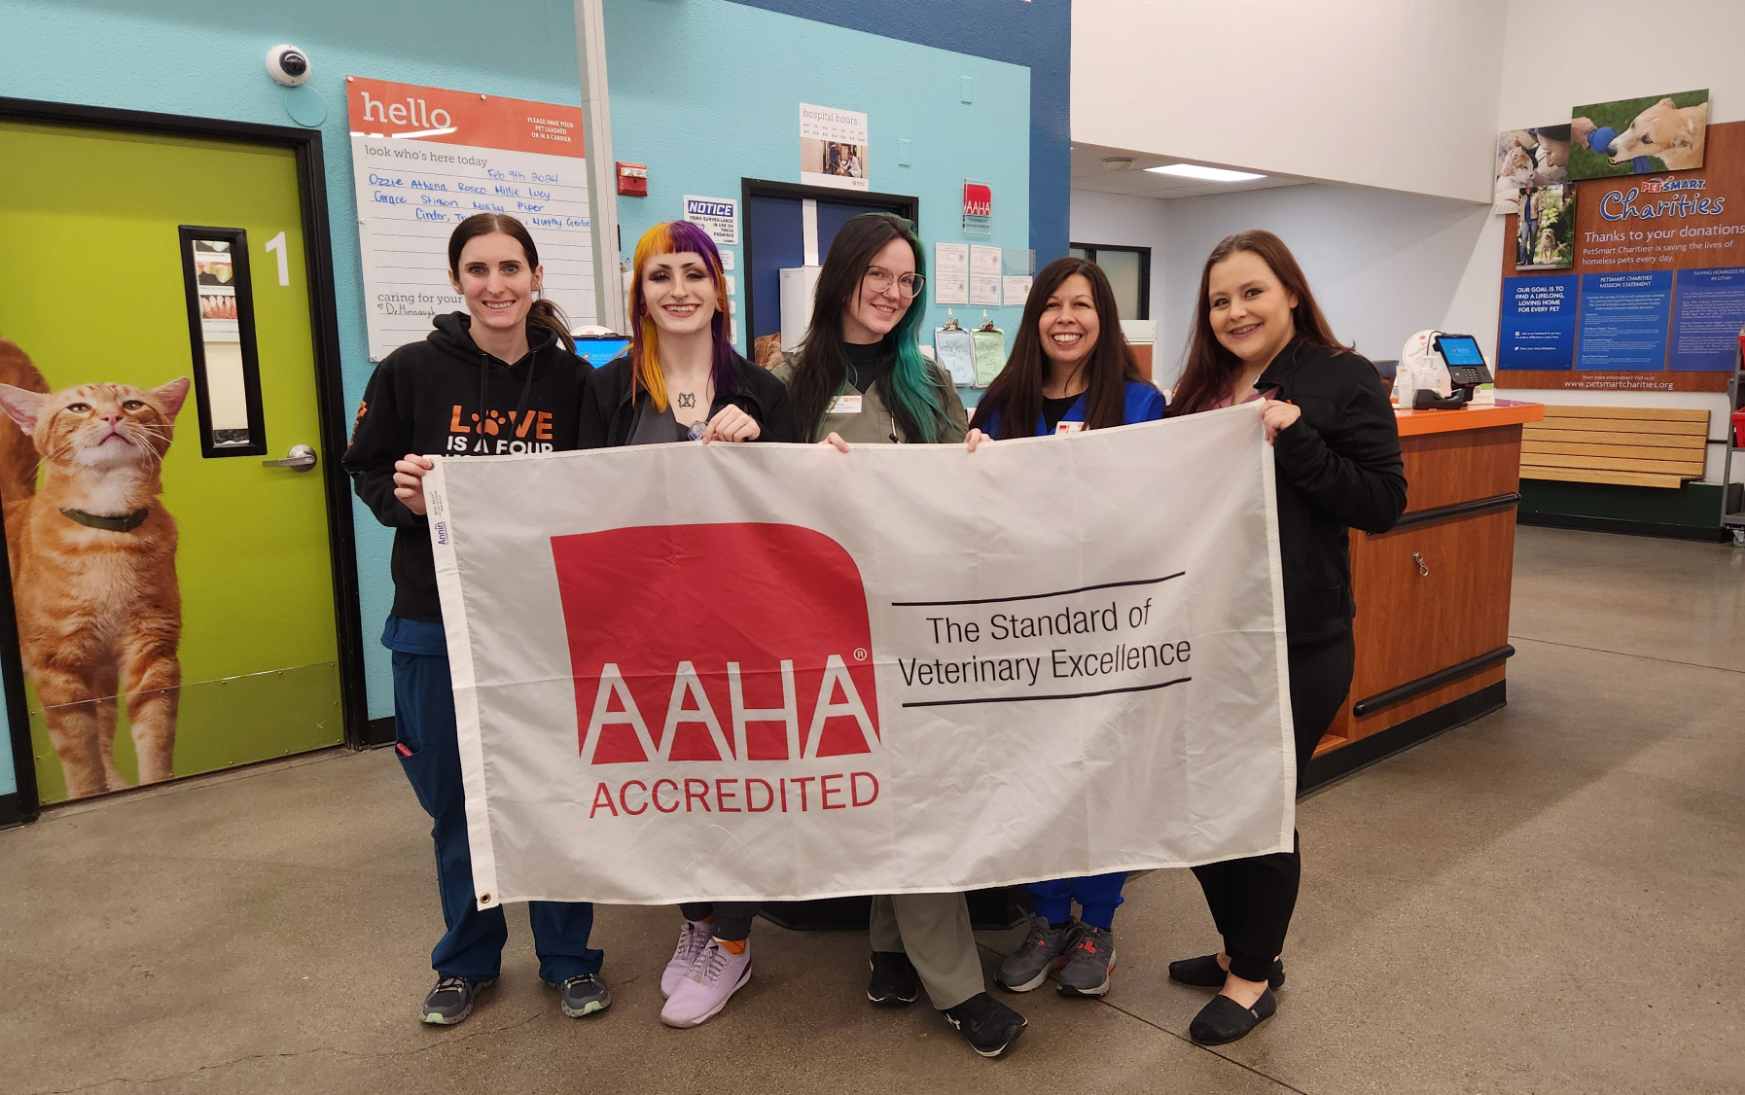 The staff displaying the AAHA certification banner